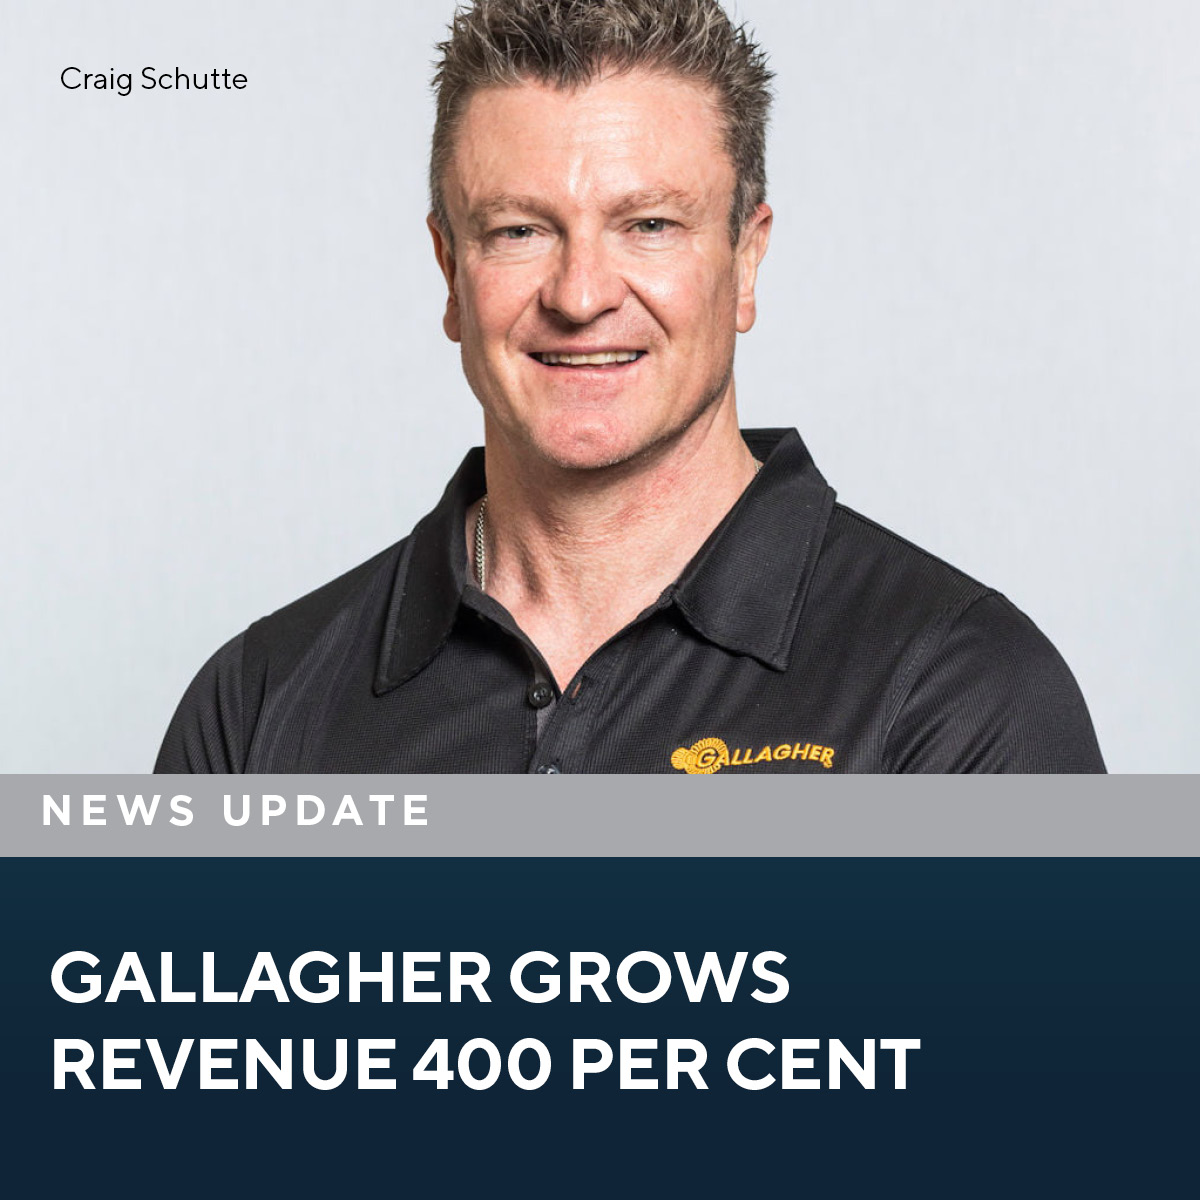 sen.news/gallagher-grow…
'Gallagher Security has grown revenue 400 per cent in 5 years, making Australia the company’s best performing market.'
#accesscontrol #entrancecontrol #doorcontrol #liftcontrol #authentication #managementsolutions #cloud #securityintegration #sen